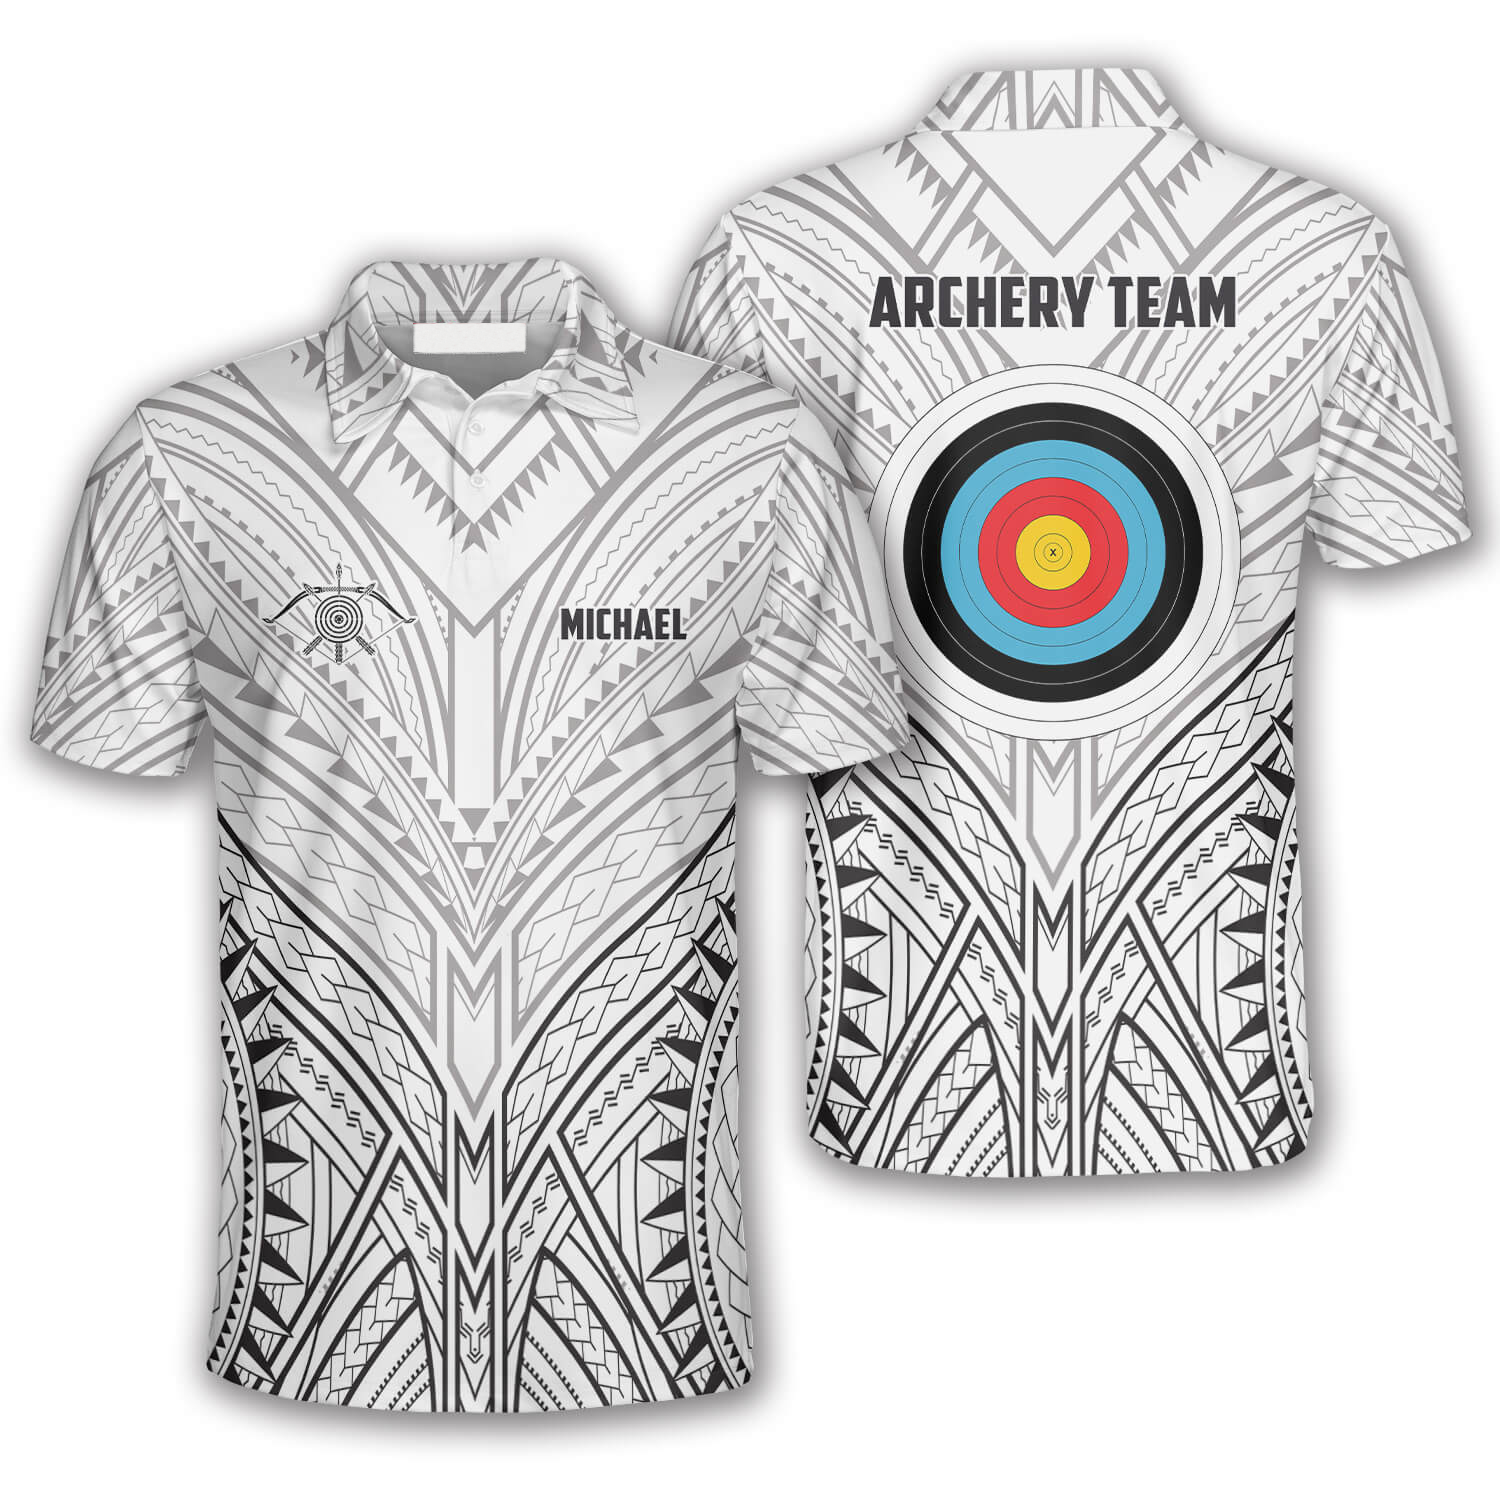 Personalized Archery Target White Tribal Custom Archery Shirts For Men/ Gift for Team Archery Shirt